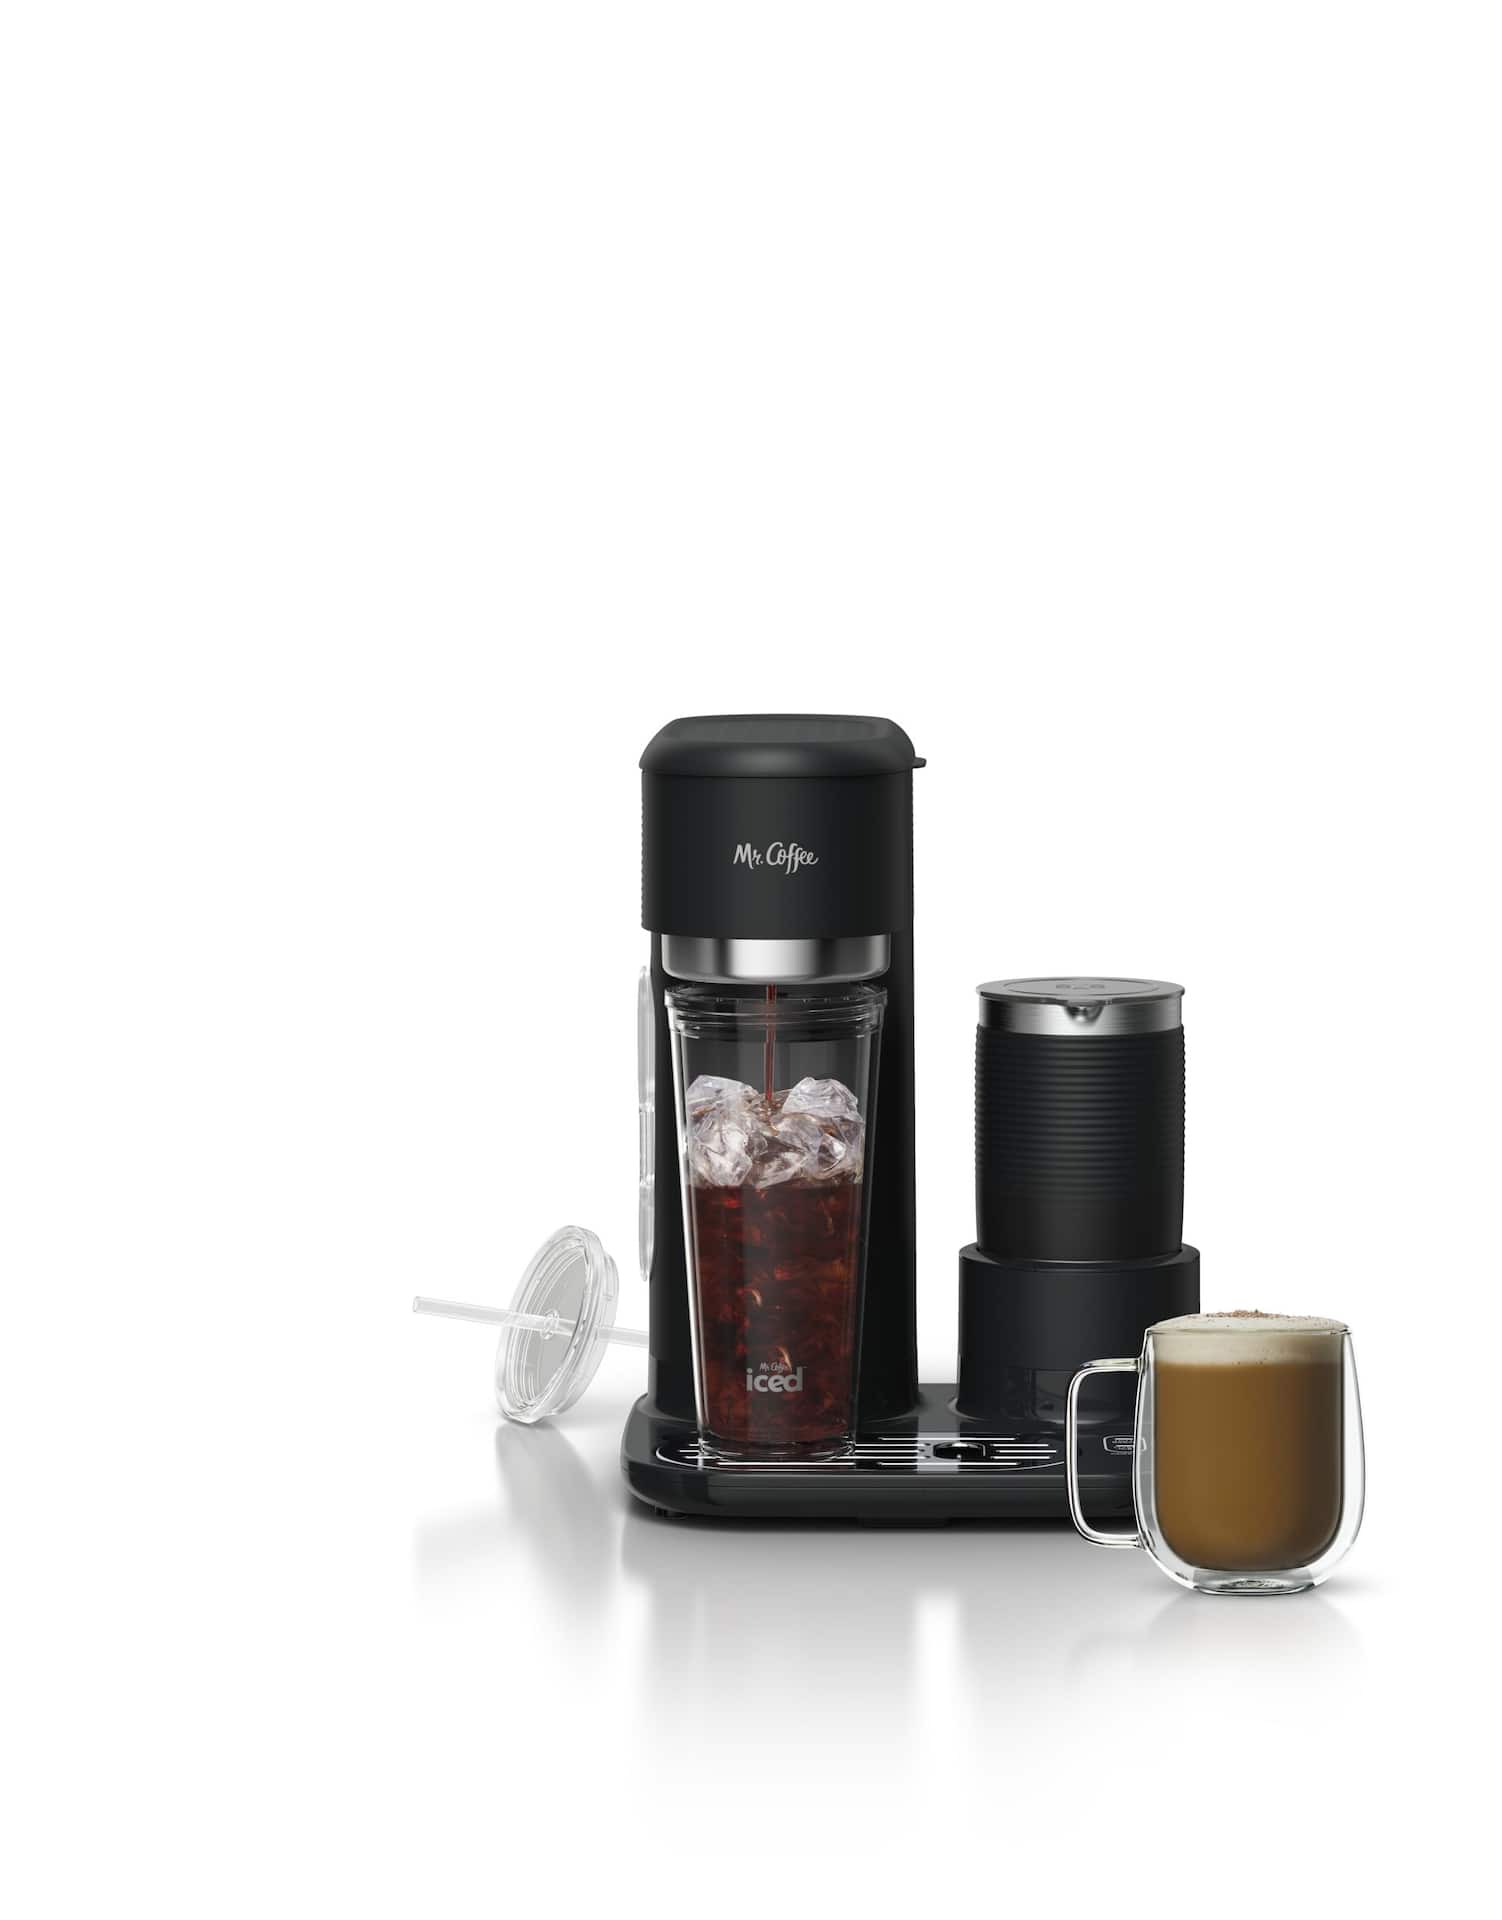 https://media-www.canadiantire.ca/product/living/kitchen/kitchen-appliances/0430156/mr-coffee-hot-or-cold-latte-maker-with-milk-frother-059cb817-d2f7-459f-a7c7-6f3ecbc0d79c-jpgrendition.jpg